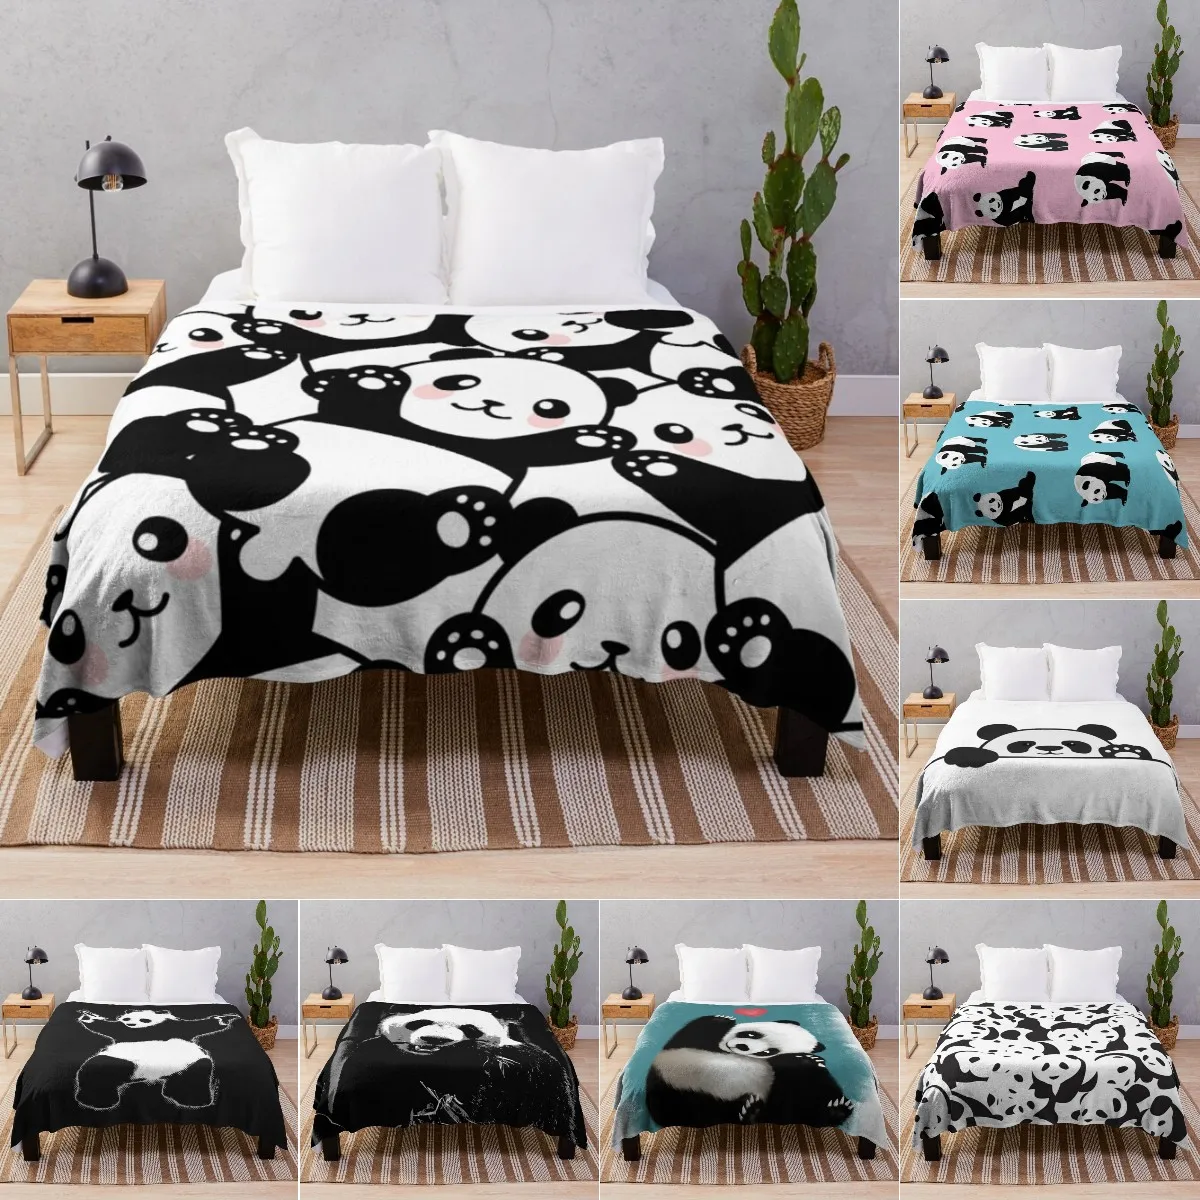 

Cute Panda Cozy Fleece Throw Blanket for Boys Bed Soft Flannel Blankets for Couch Sofa Bedroom Living Rooms Queen King Twin Size